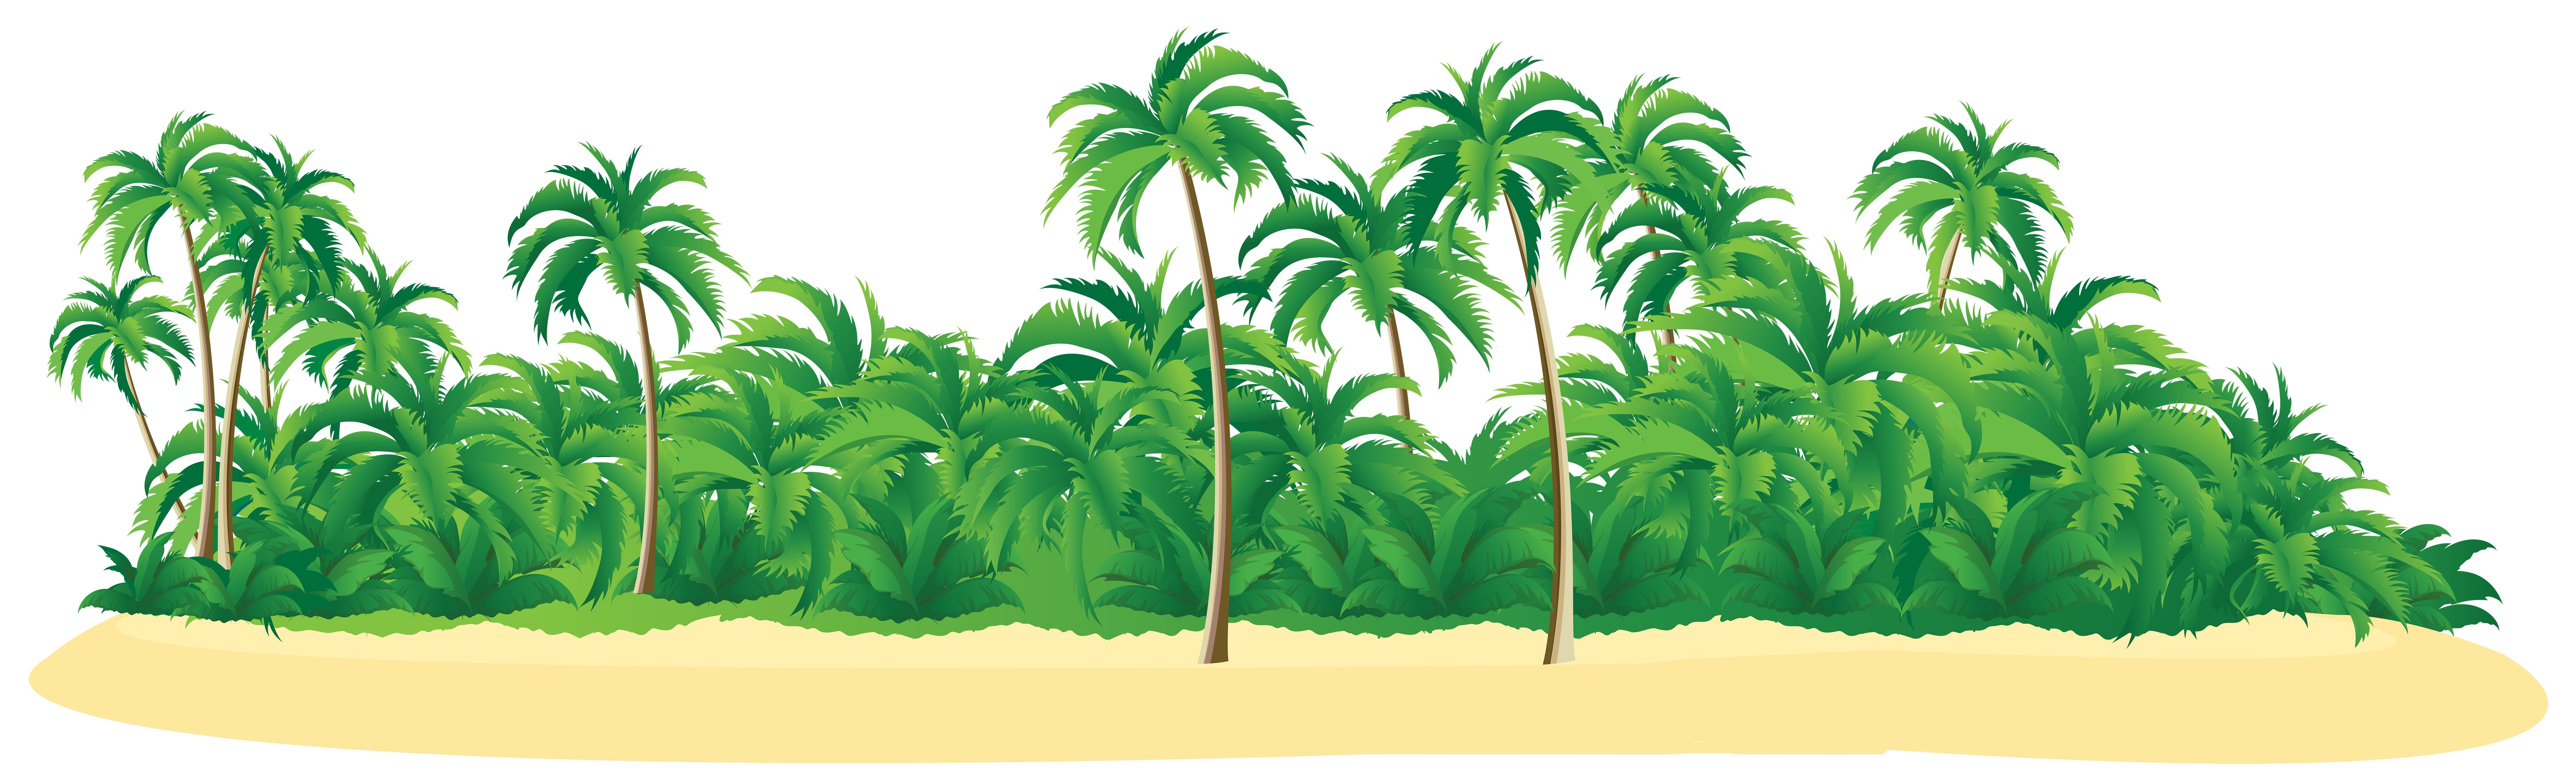 island with palm trees clipart - Clipground